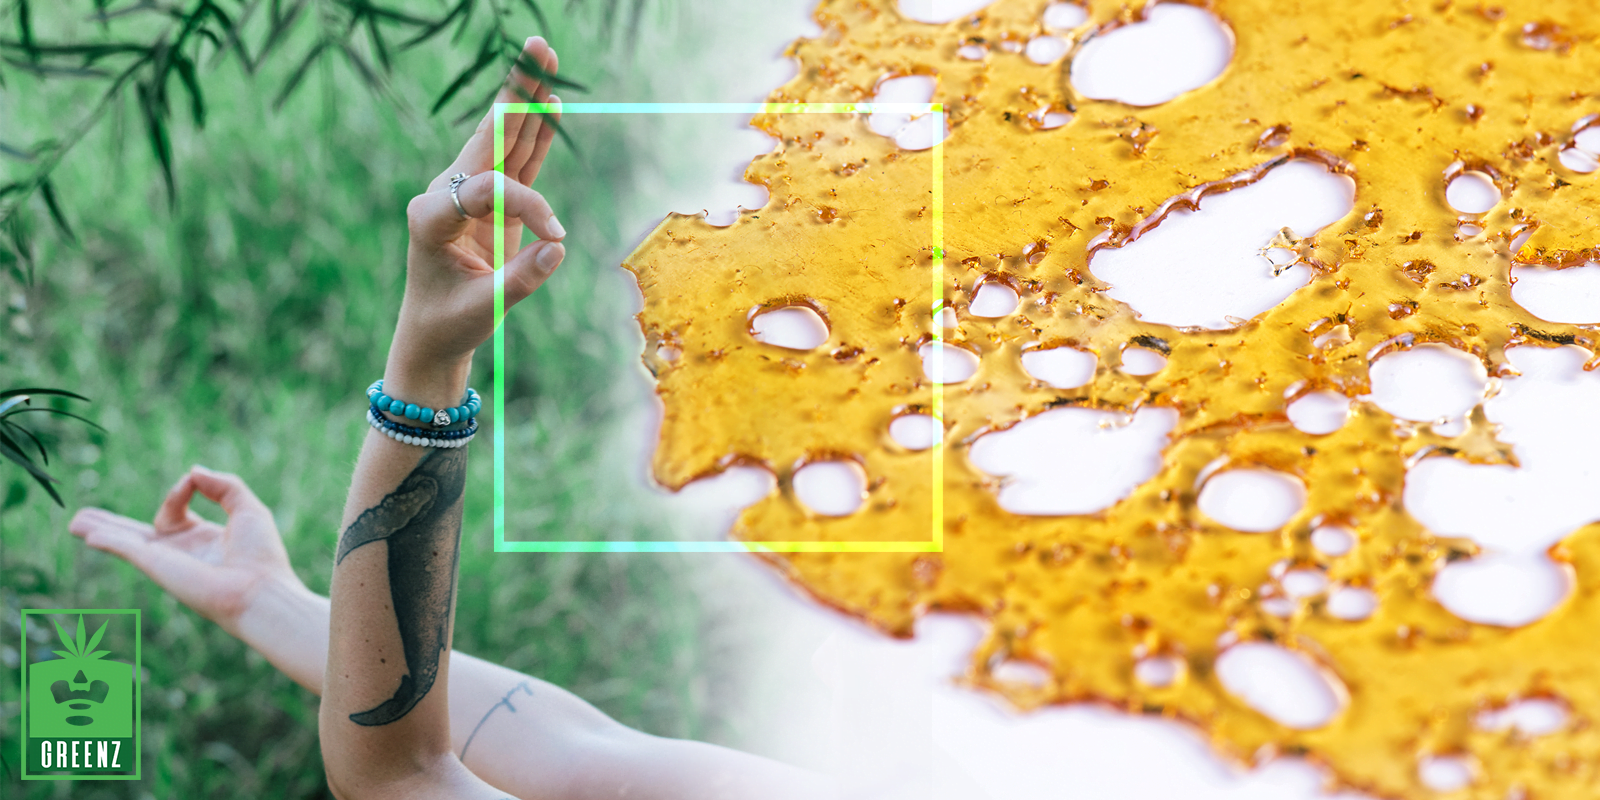 All About Concentrates – What Makes Each Unique & The Latest Trends